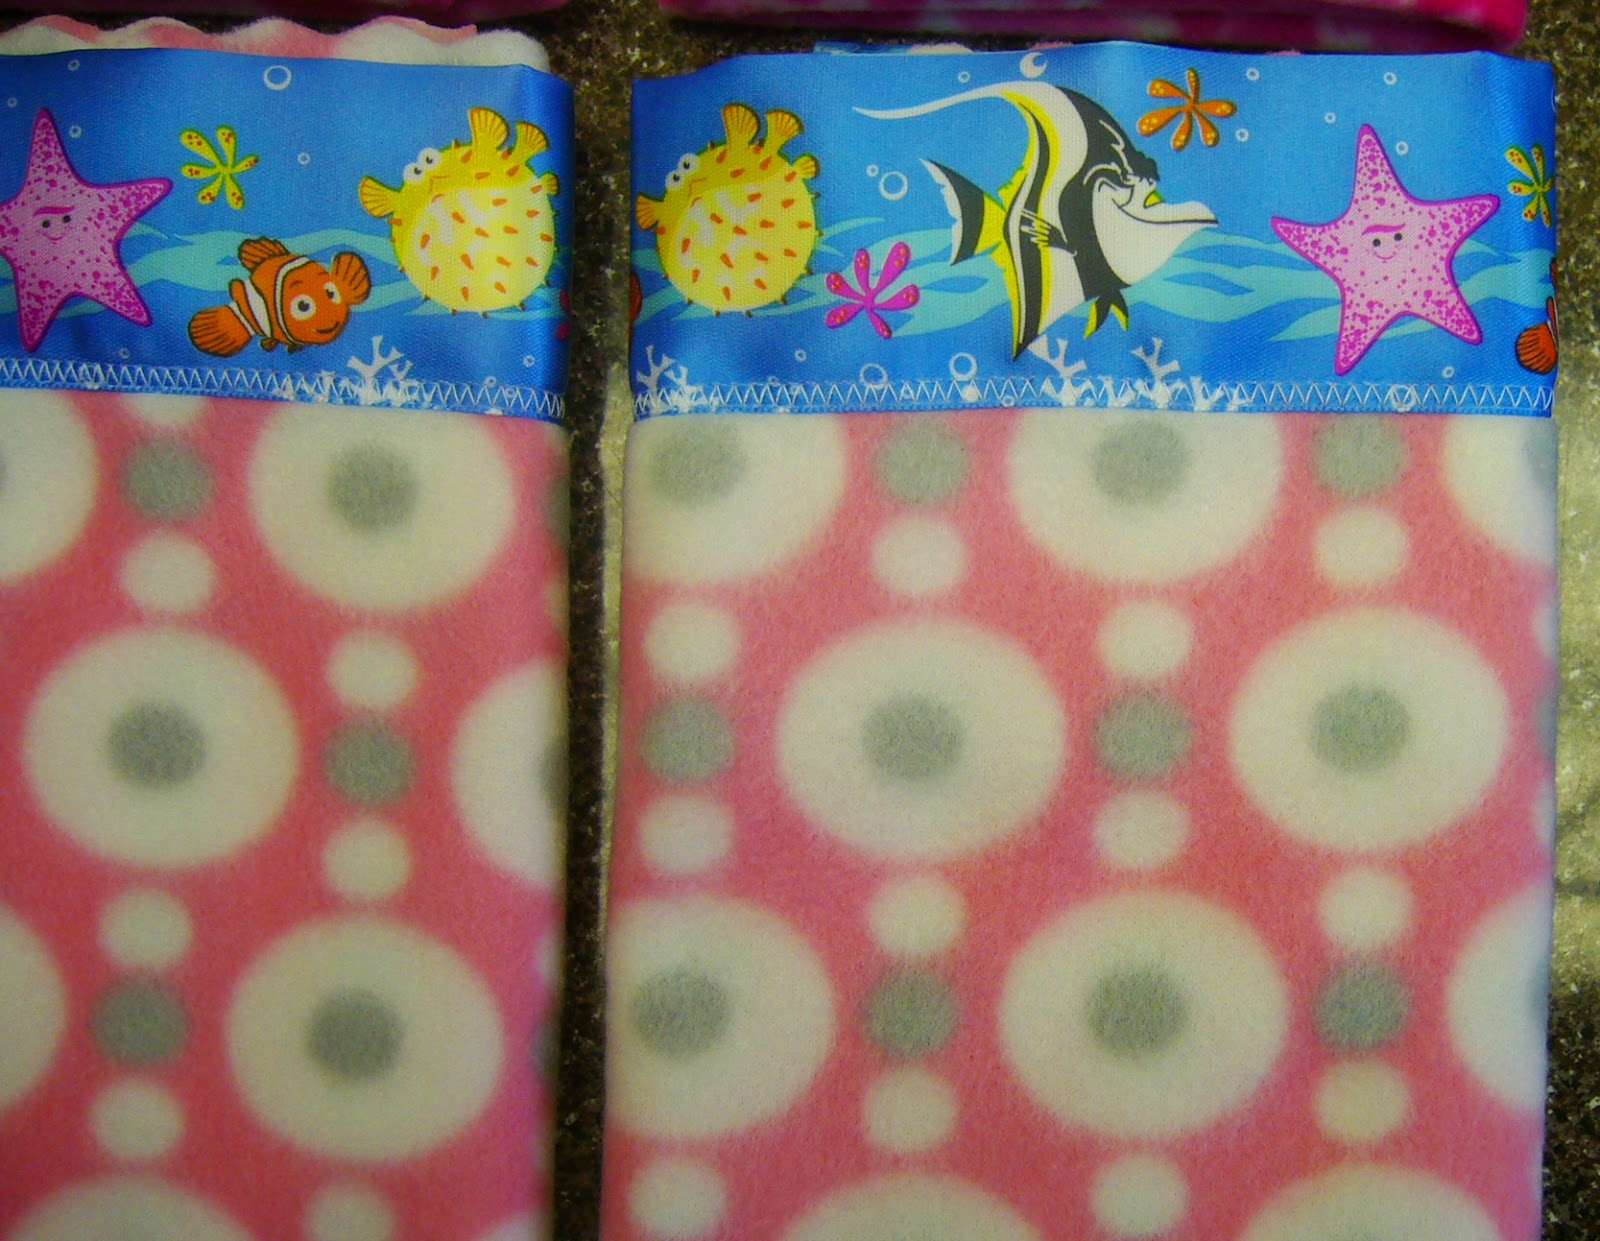 Simply Shoeboxes: Satin Blanket Binding on Bitty Blankets for OCC